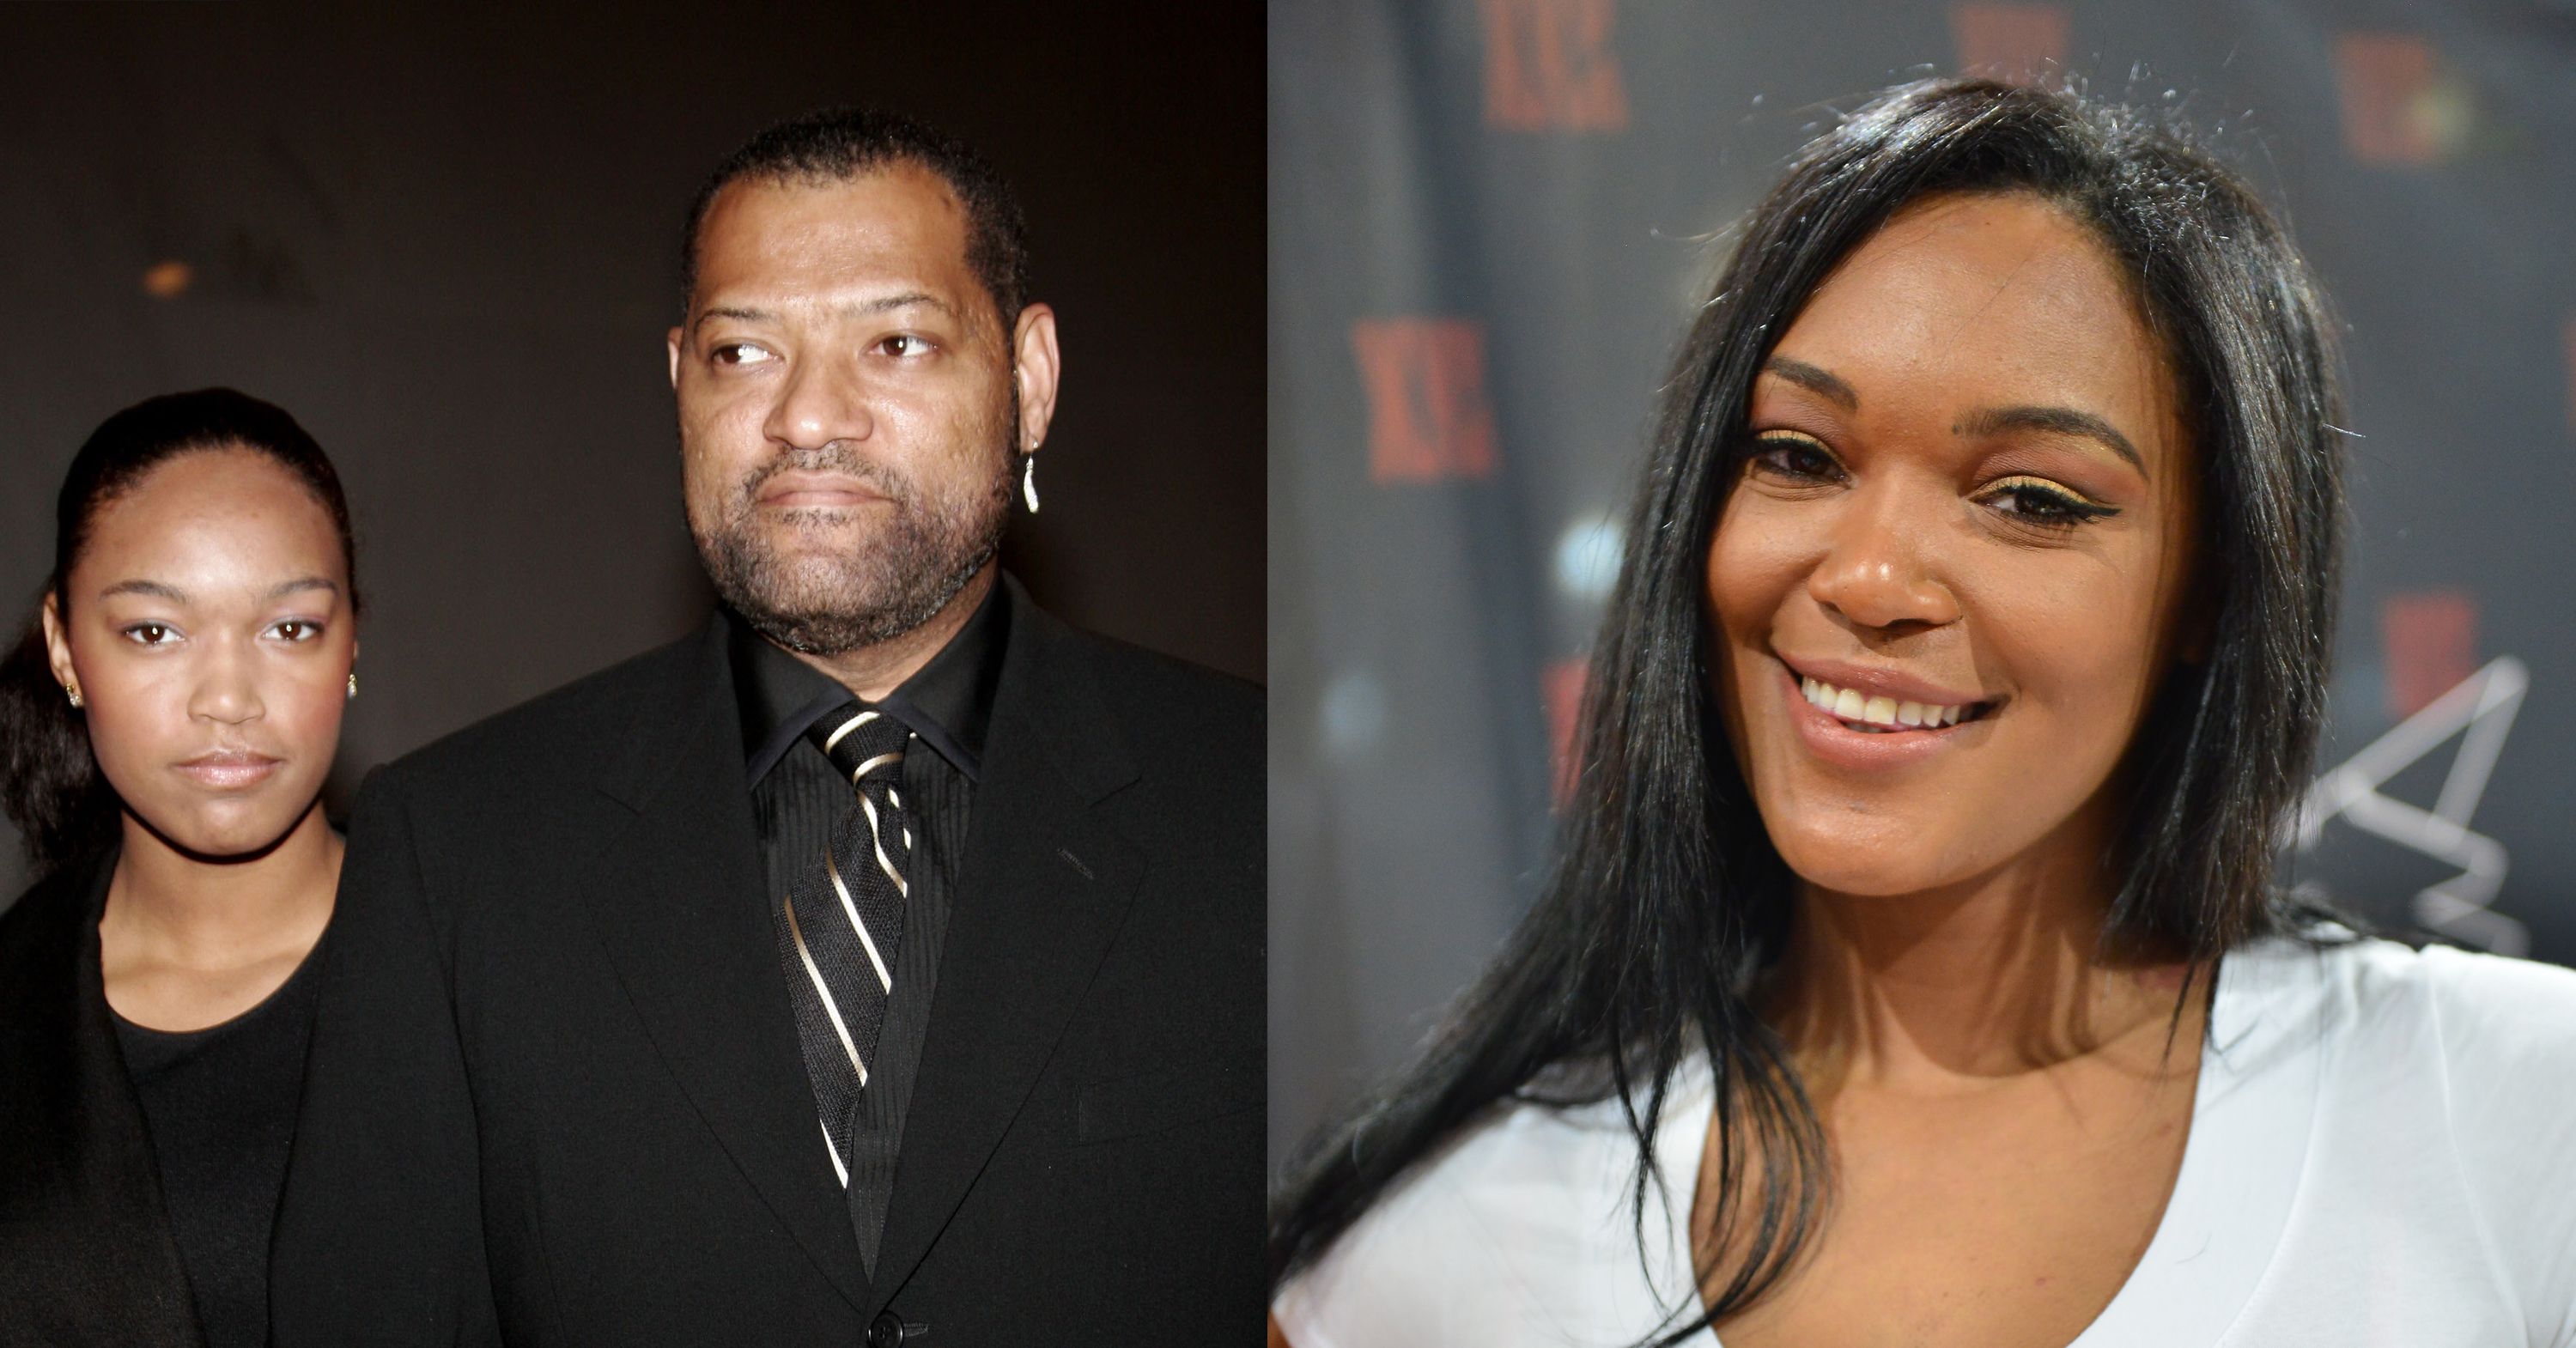 ash azir recommends laurence fishburne daughter sex tape pic